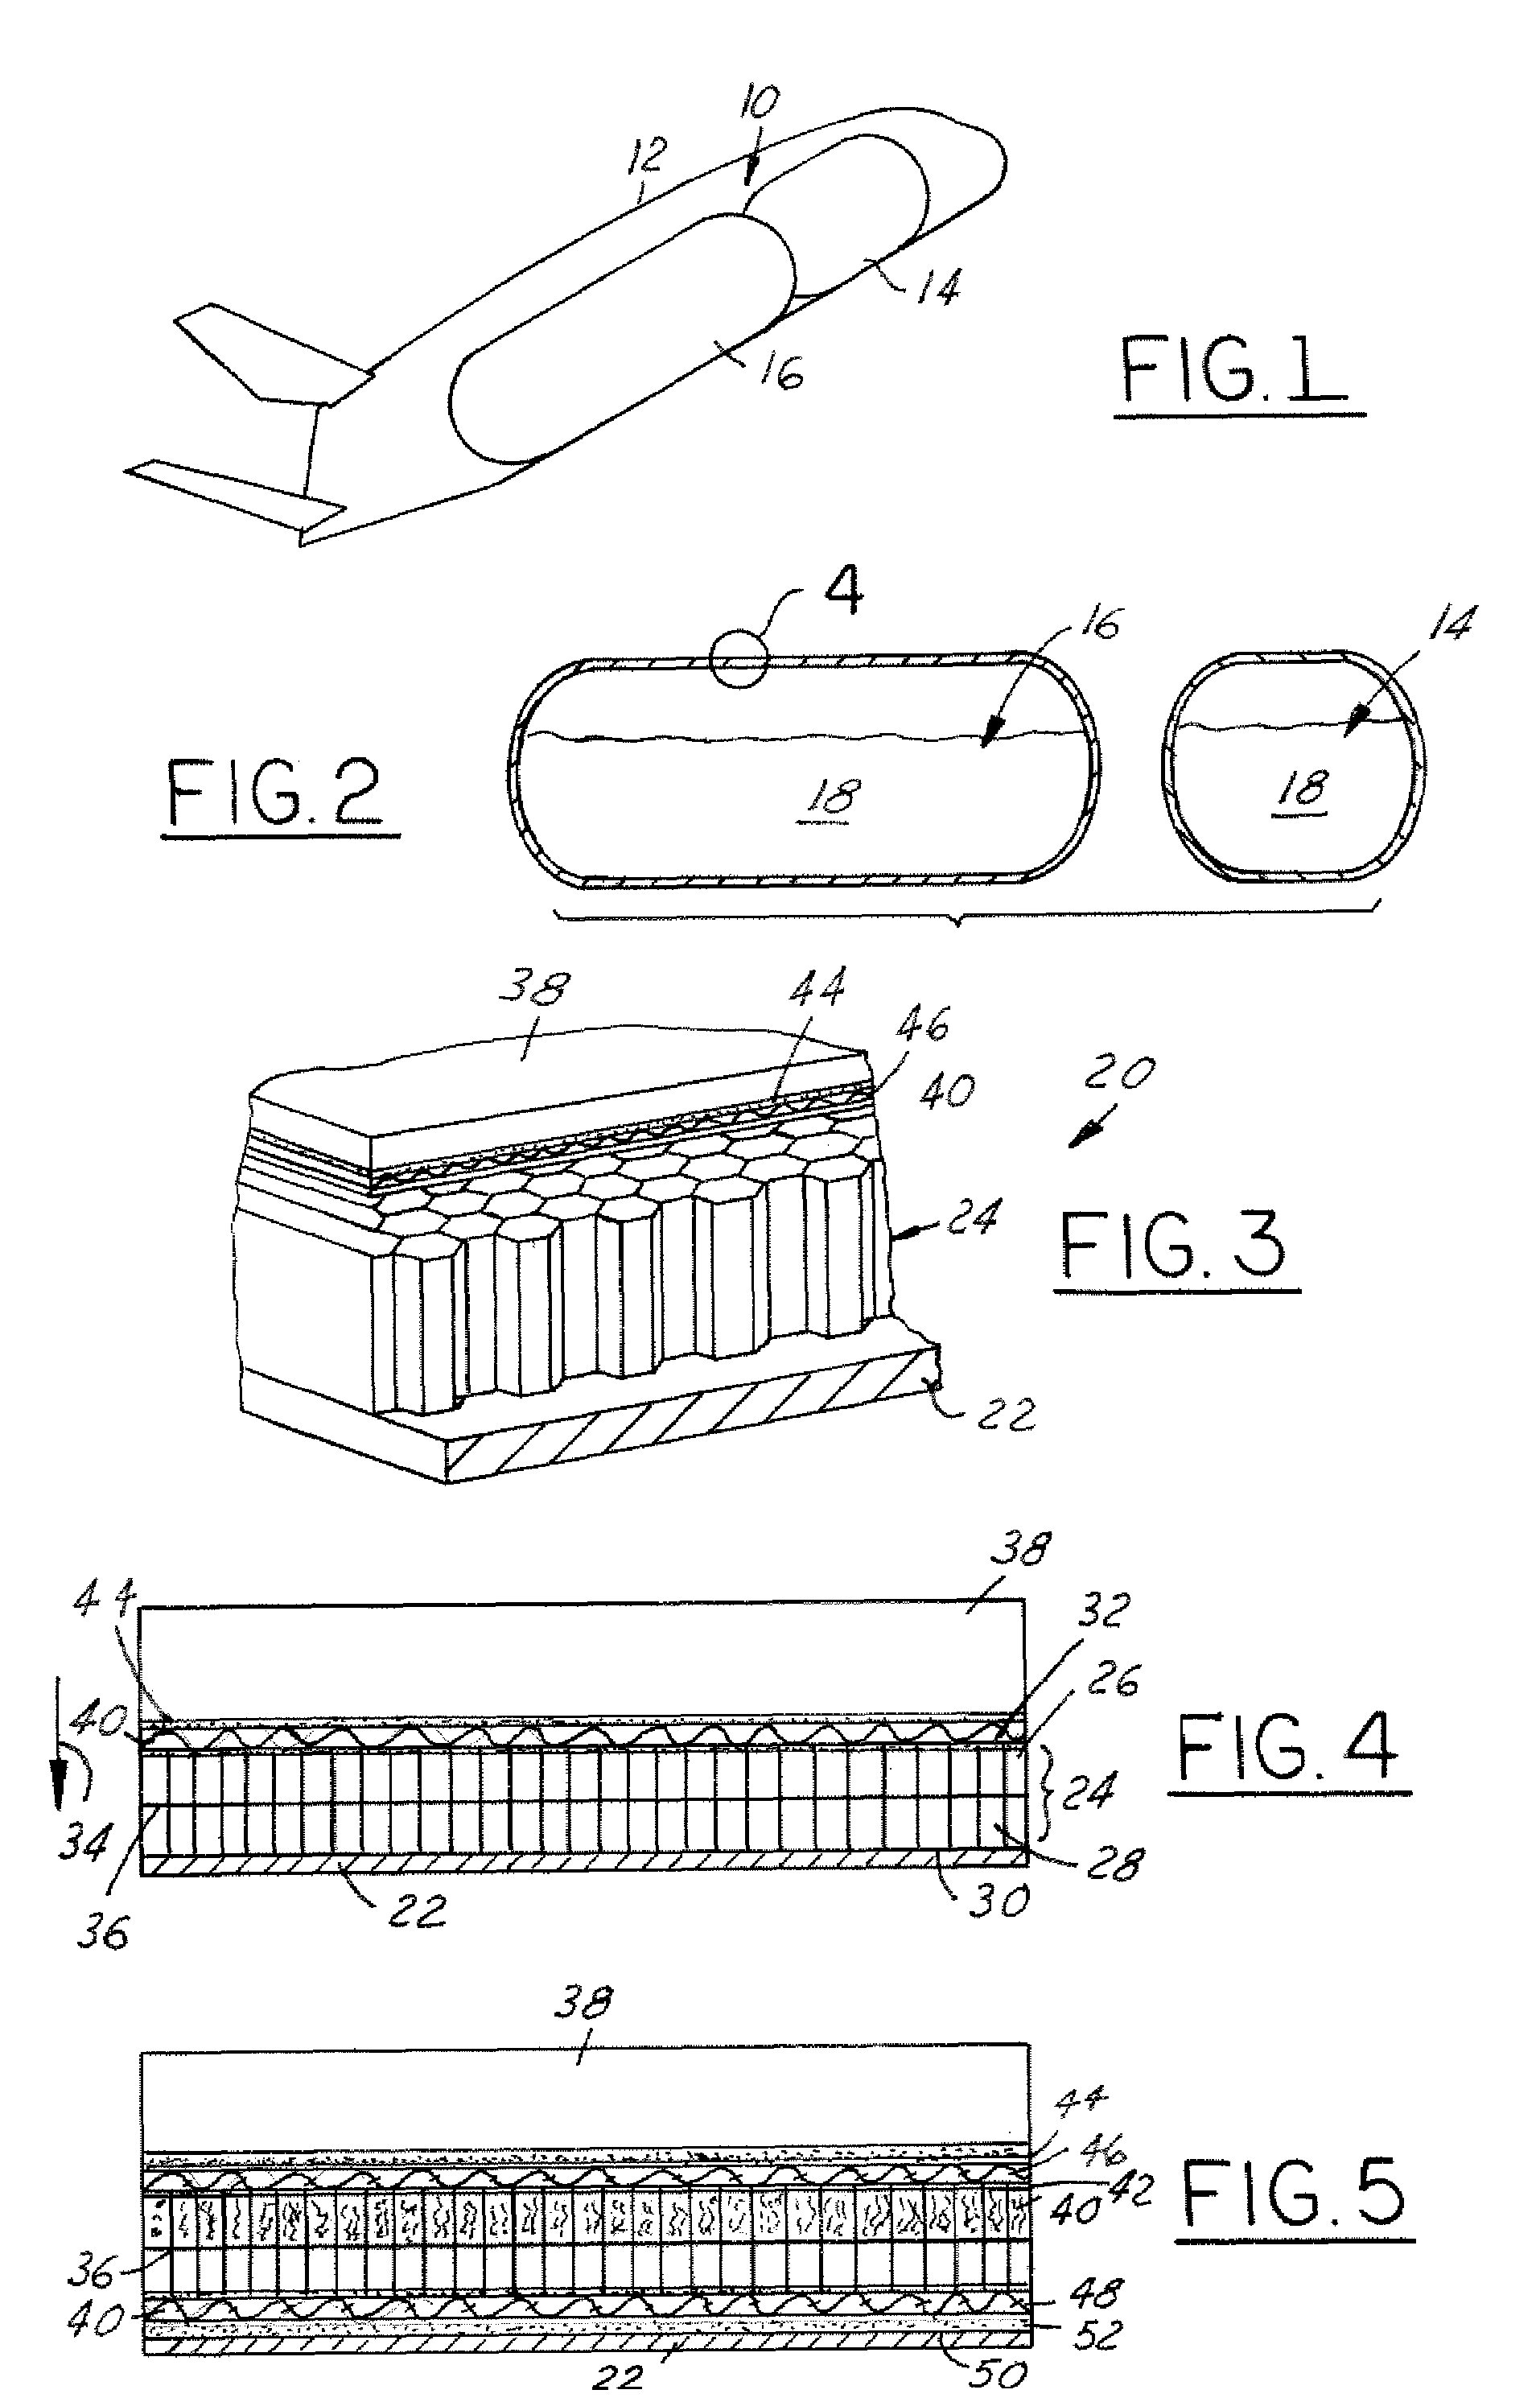 Cryogenic fuel tank insulation assembly